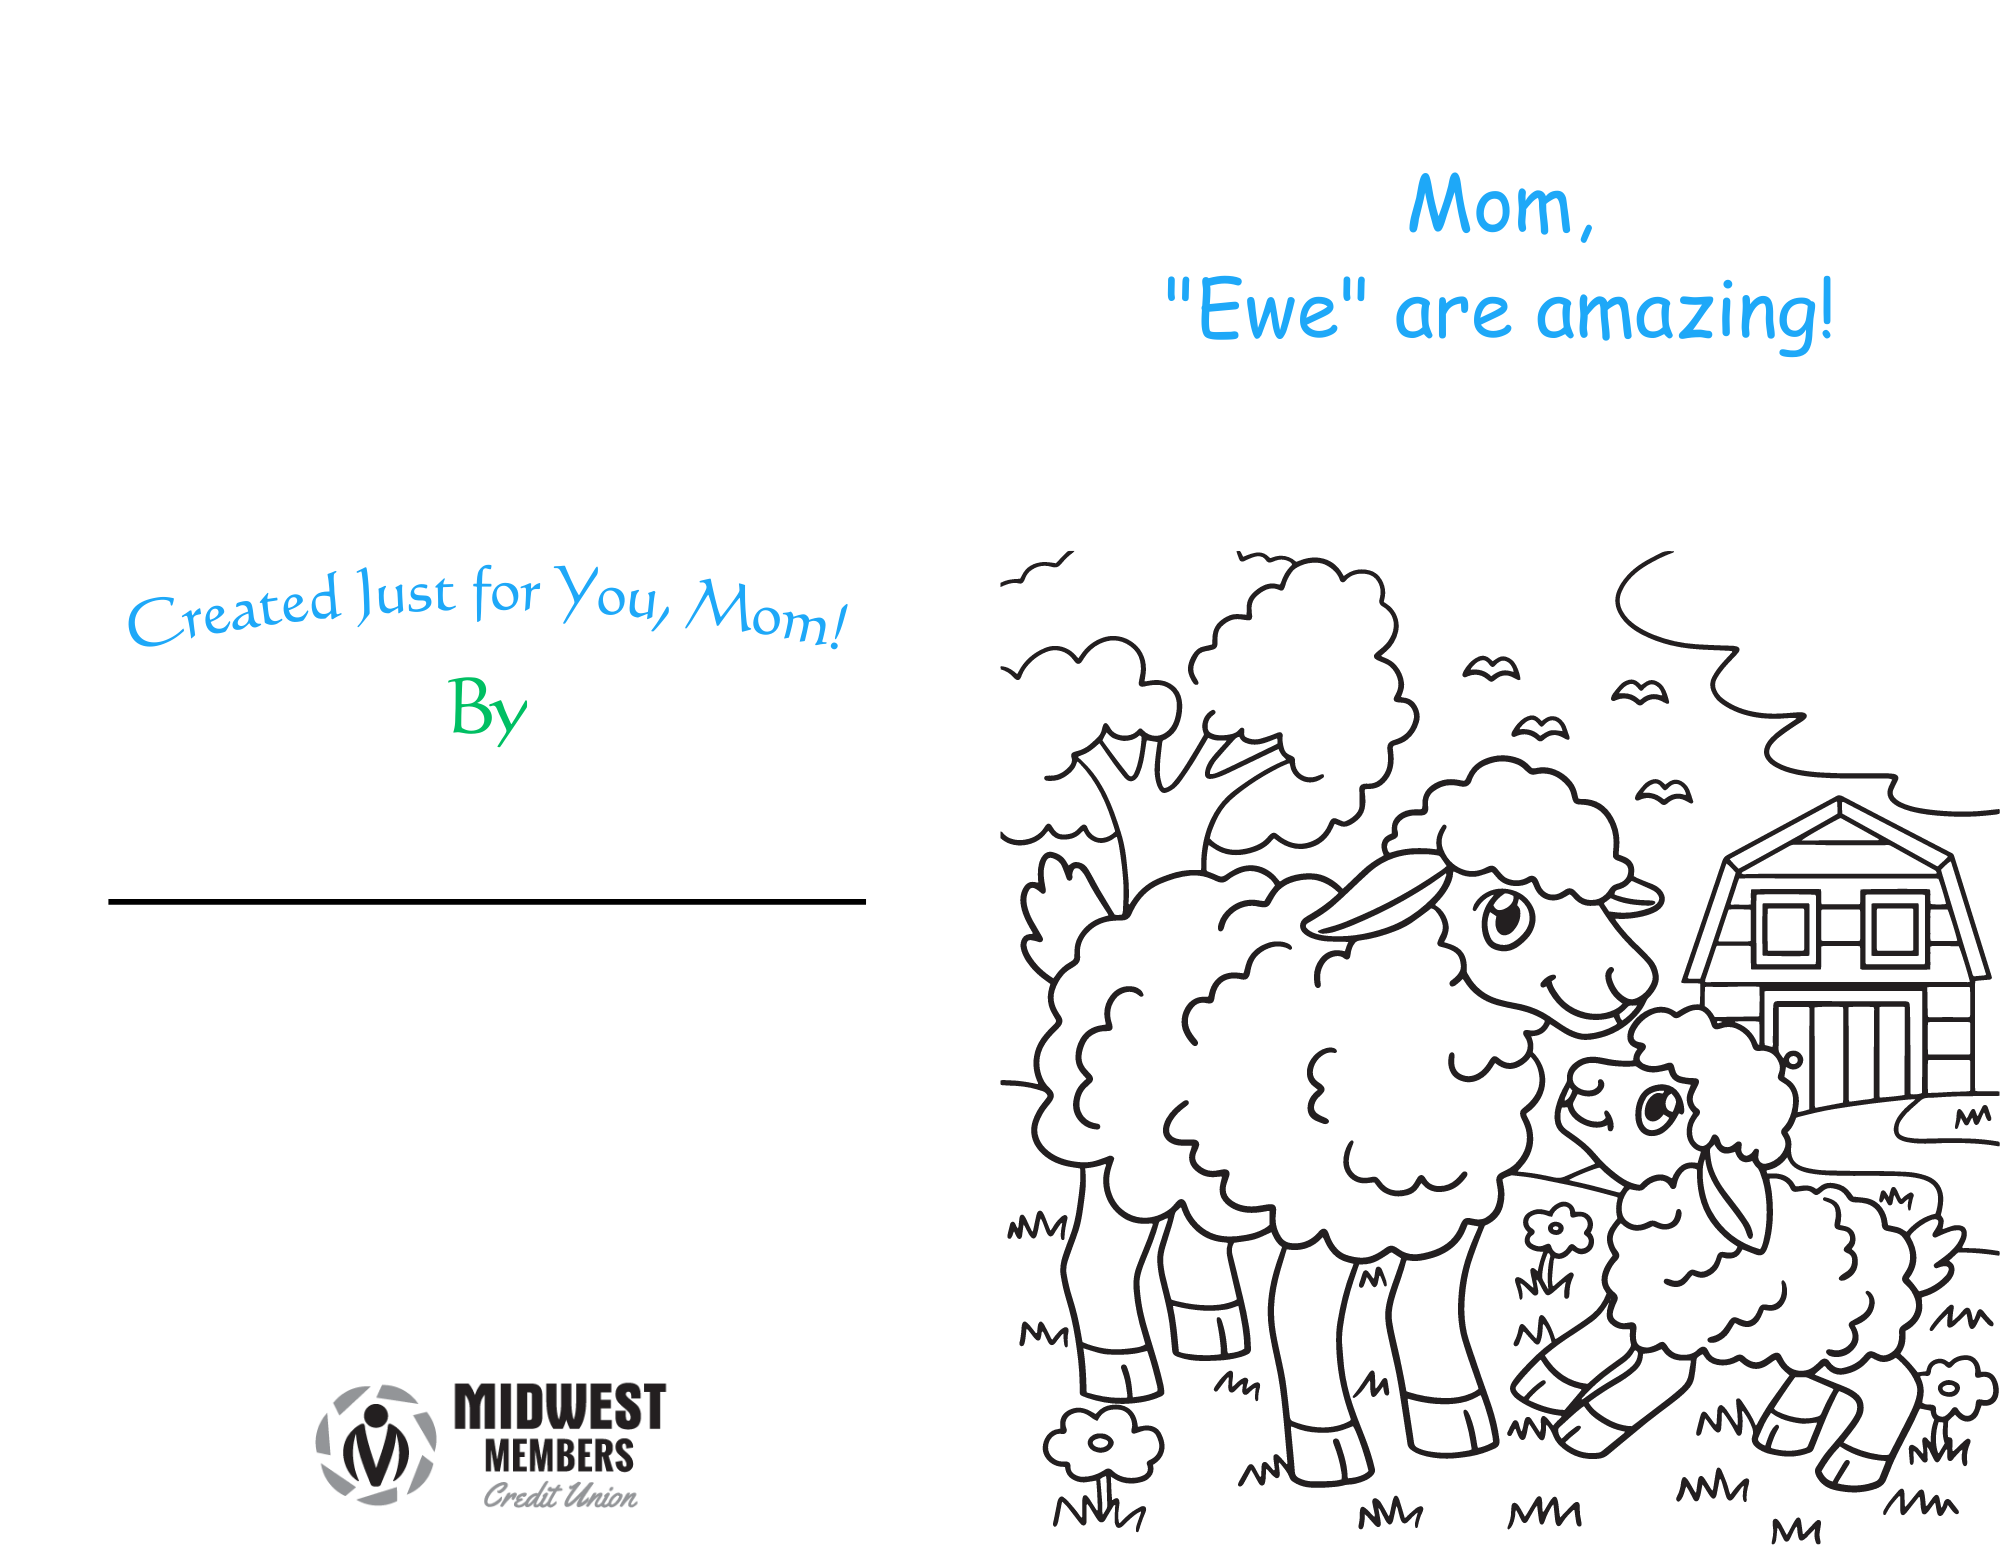 Coloring picture of ewe and baby.